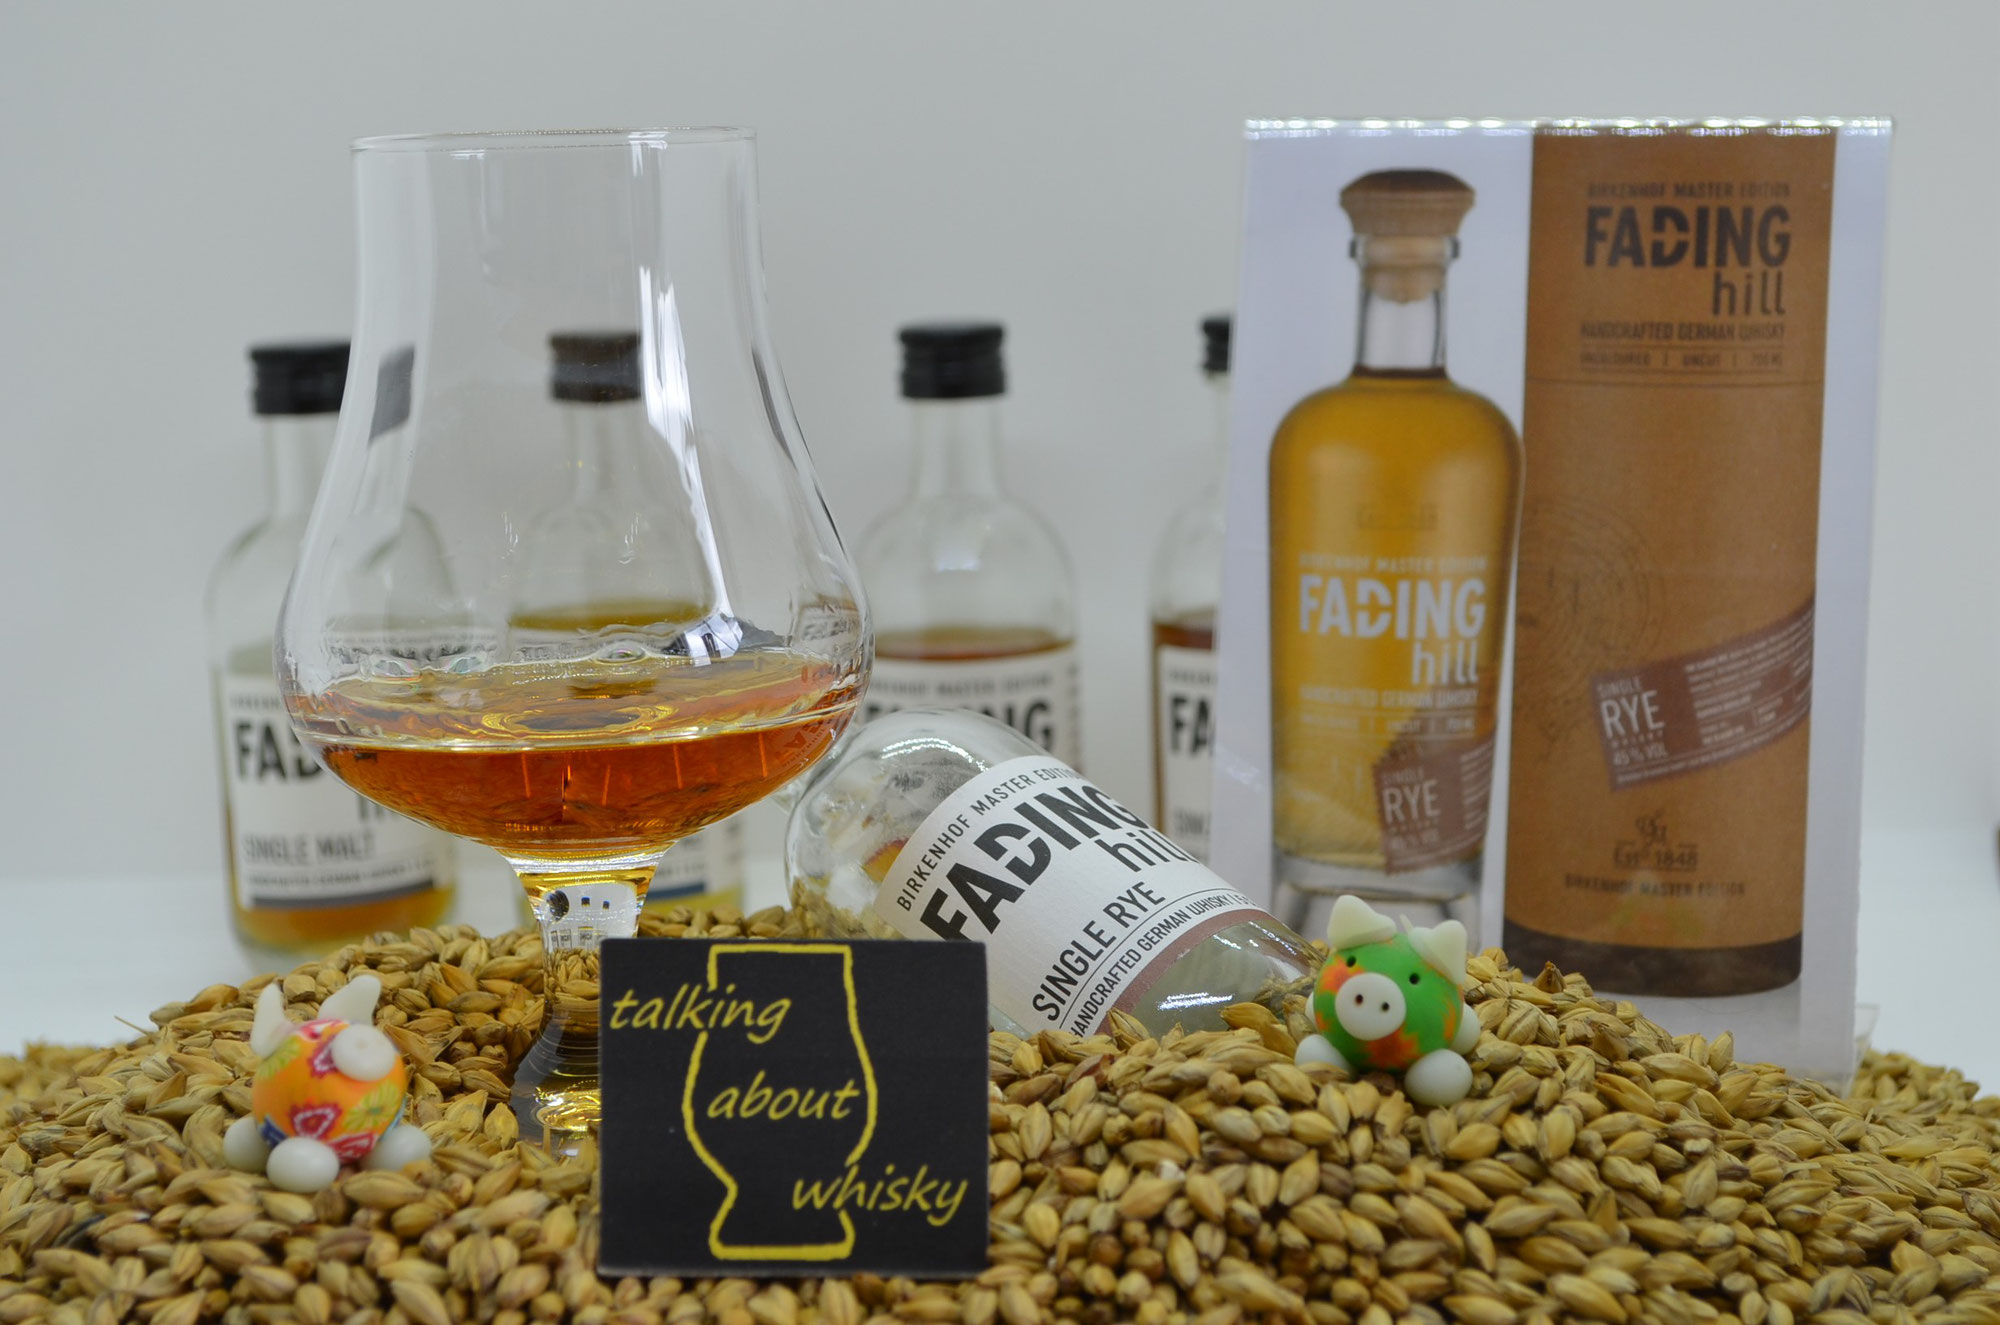 Quick-Notes - Fading Hill Single Rye 2015